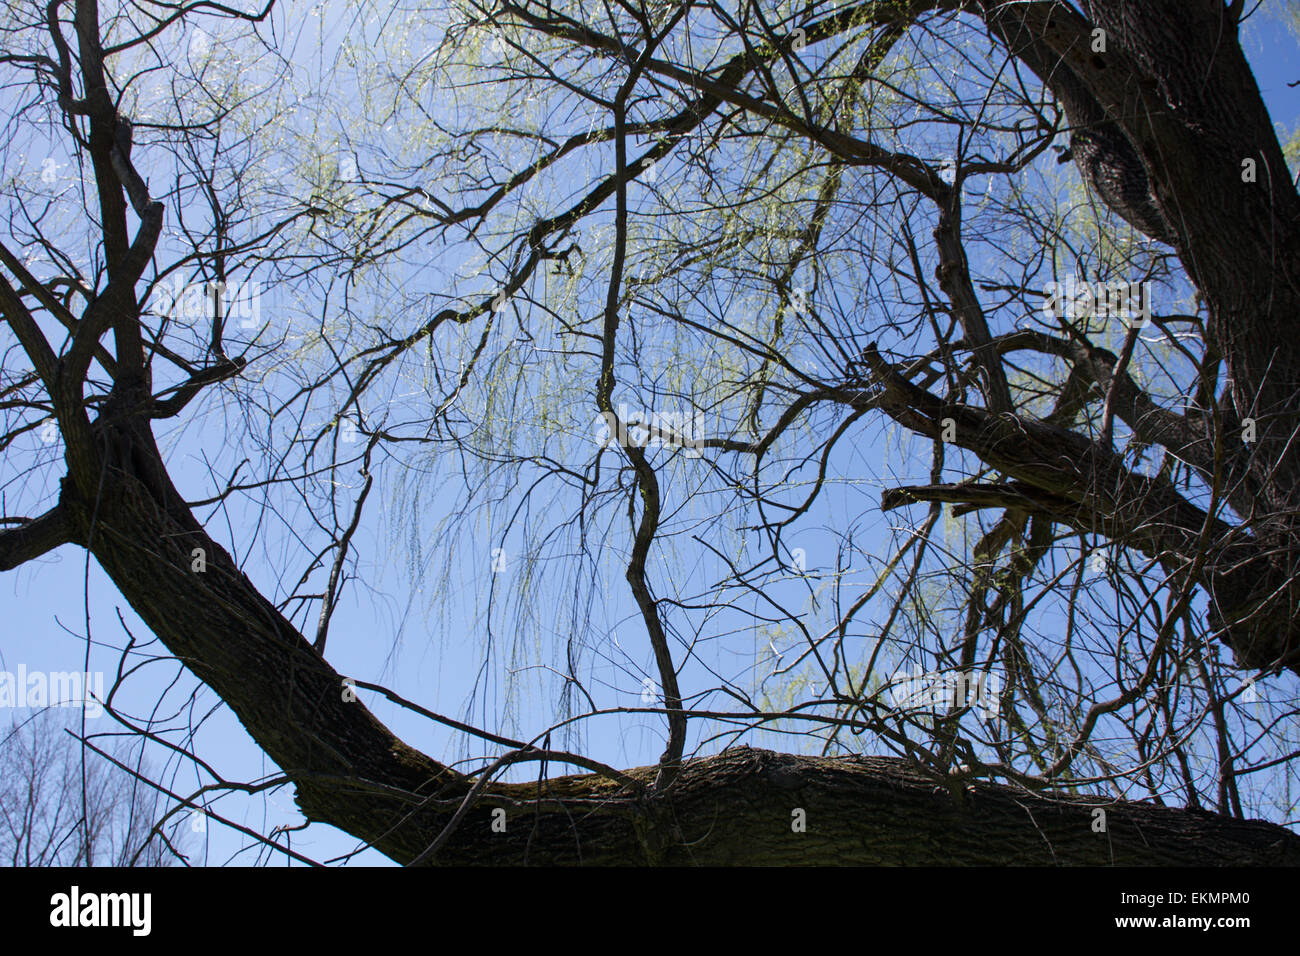 A willow tree. Stock Photo